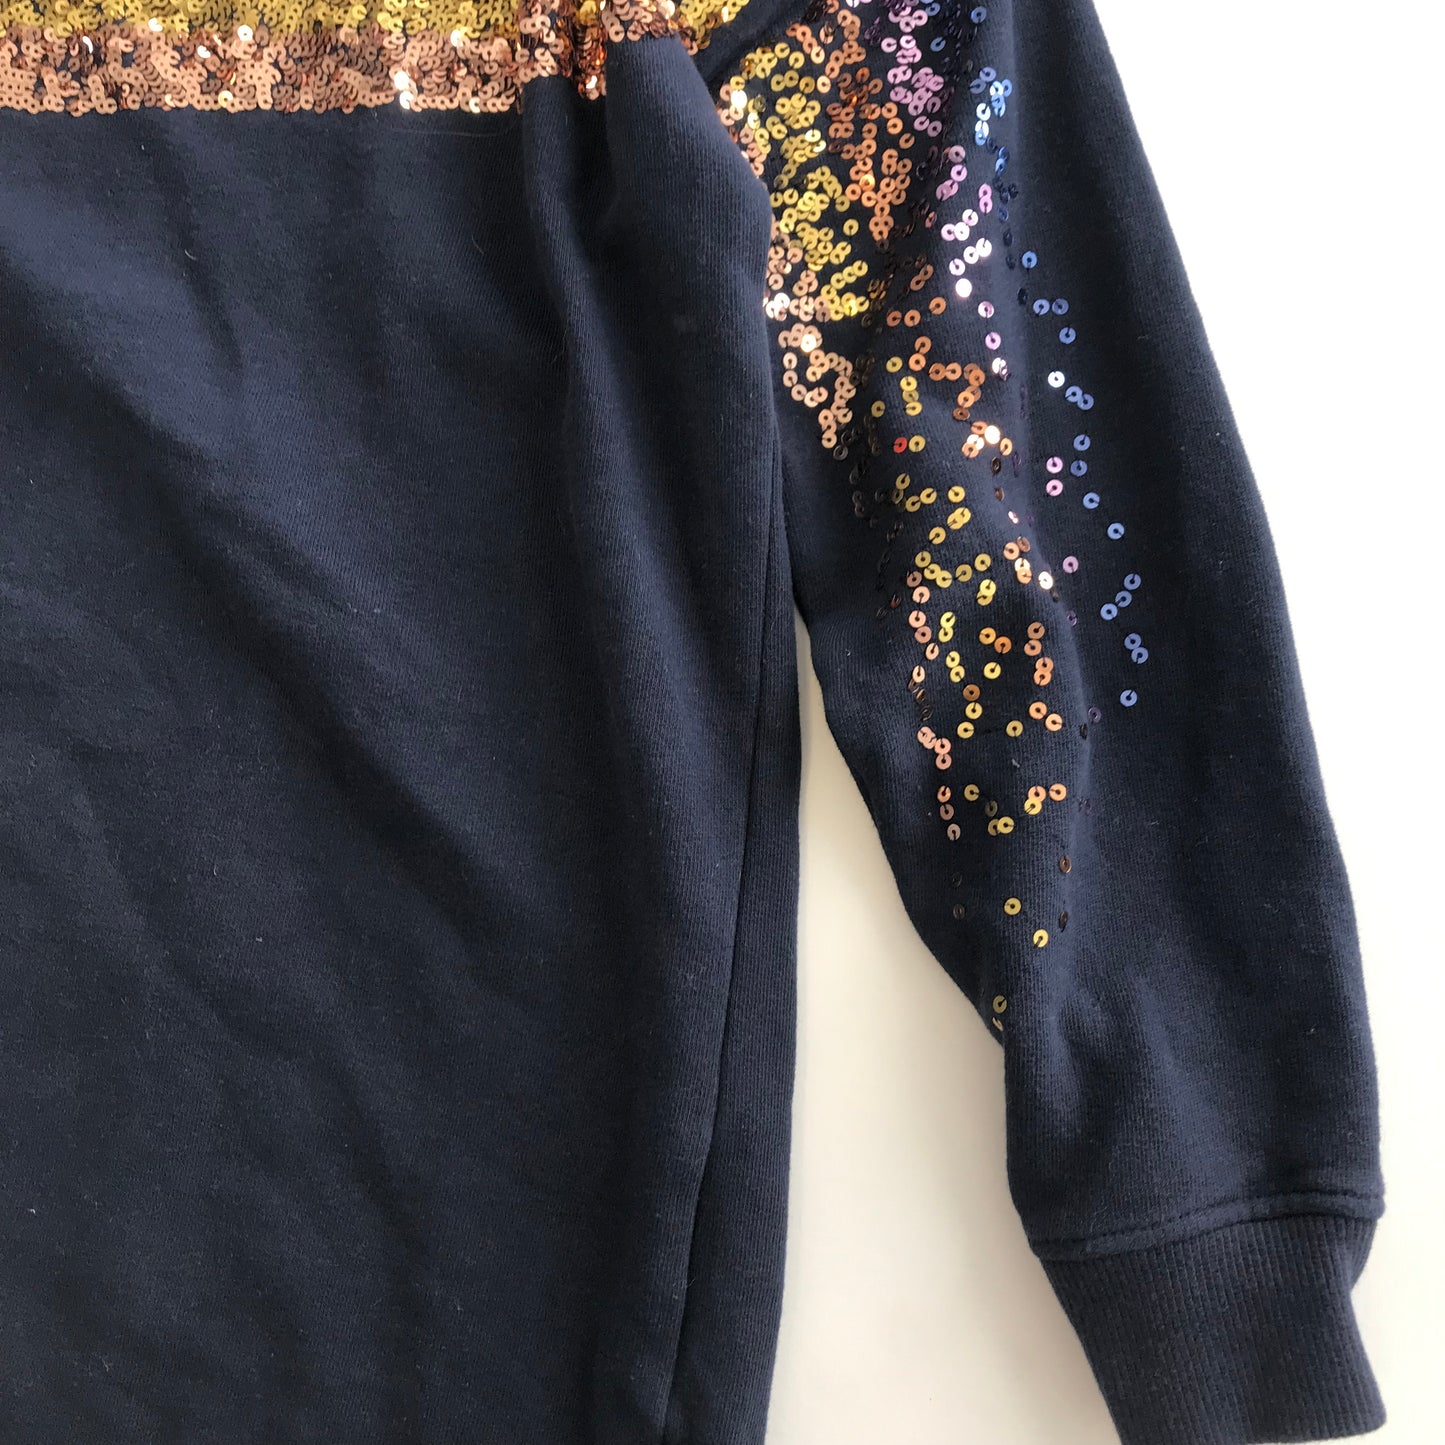 NEXT Long Sweatshirt with Sequins Age 11